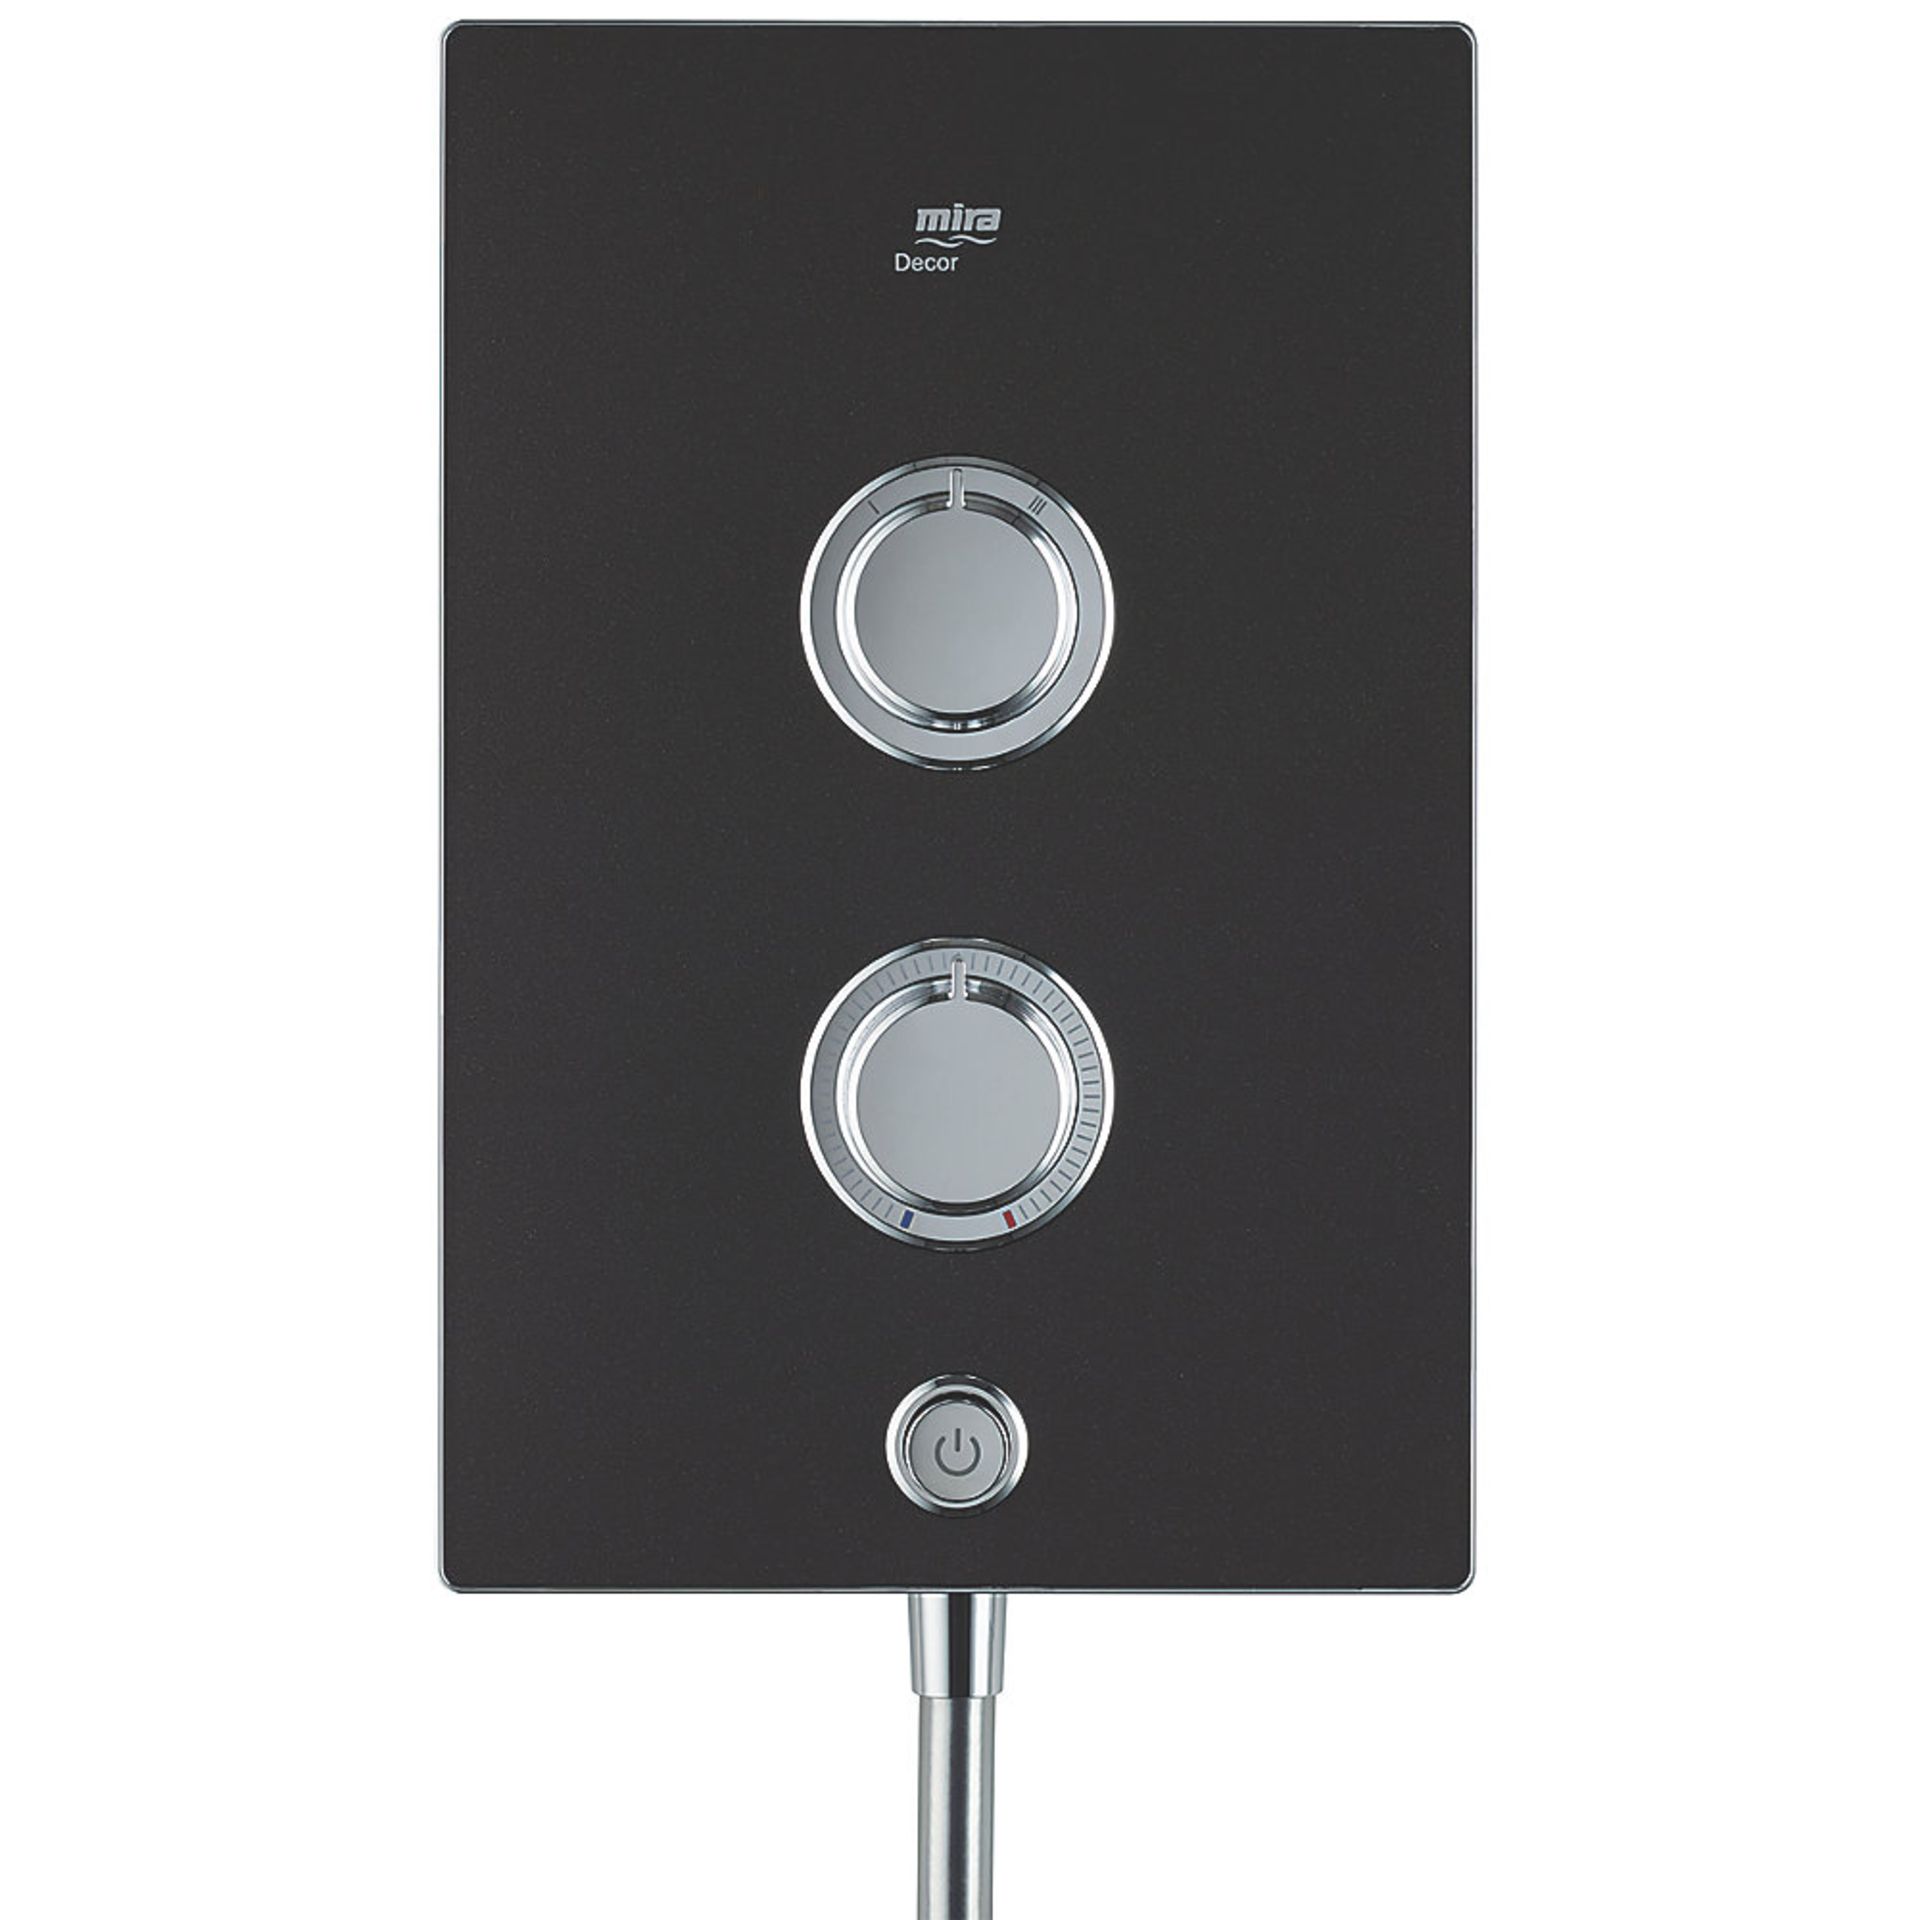 (XL13) MIRA DECOR BLACK ONYX ELECTRIC SHOWER, 9.5 KW. RRP £366.99. Give your daily routine a t... - Image 3 of 3